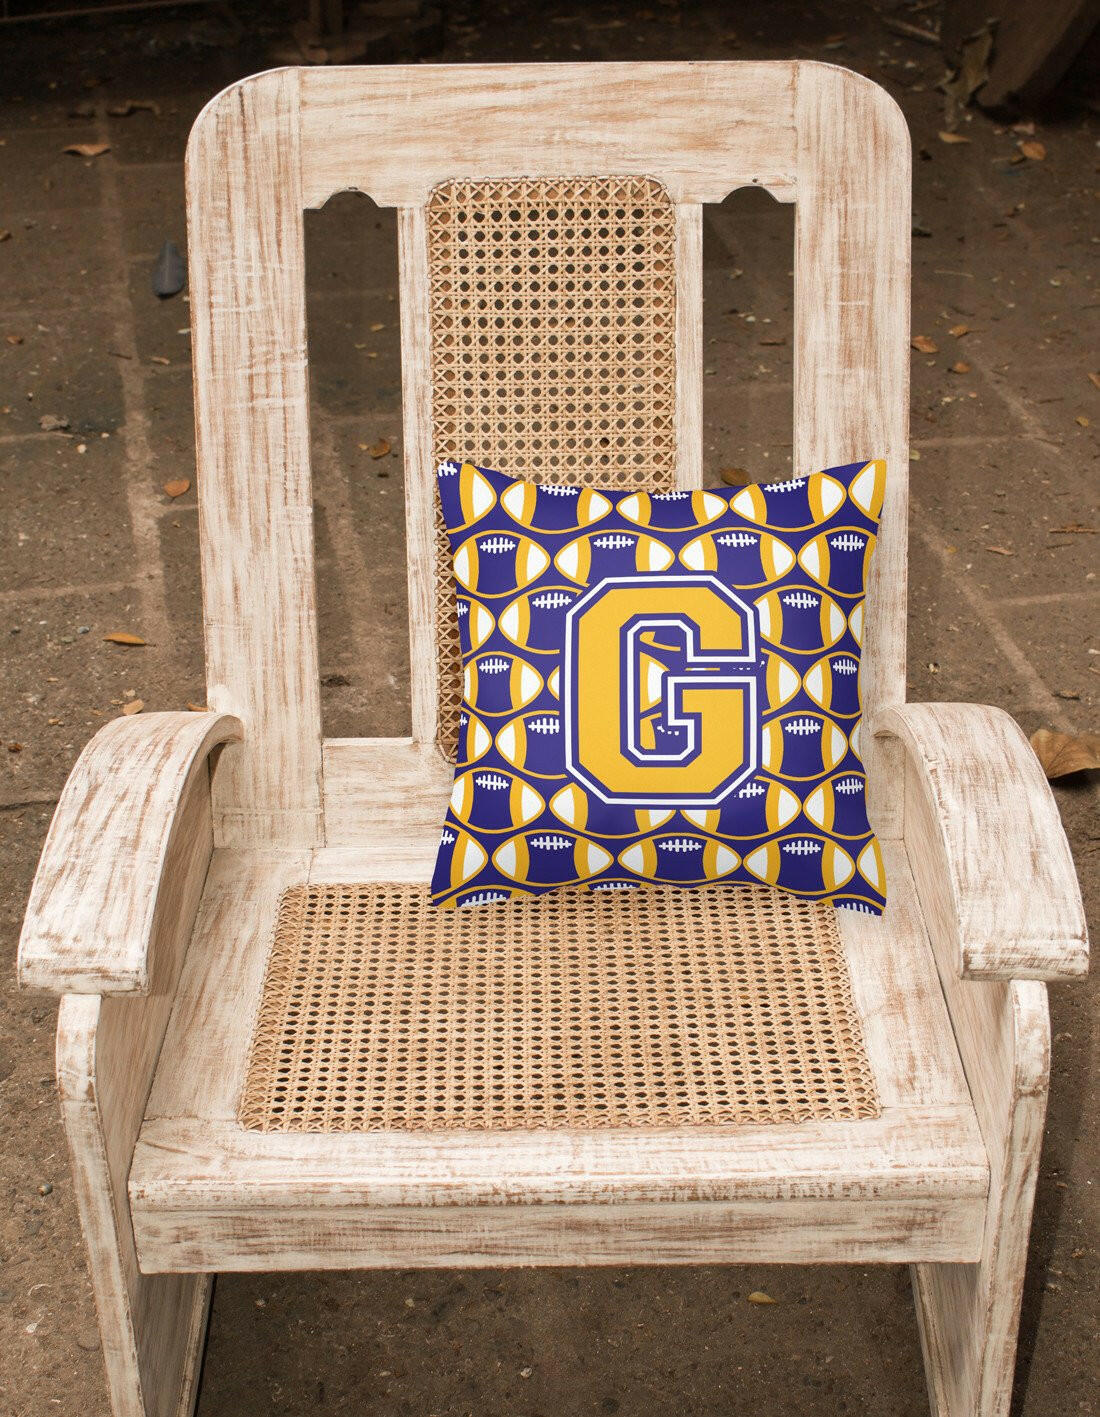 Letter G Football Purple and Gold Fabric Decorative Pillow CJ1064-GPW1414 by Caroline's Treasures